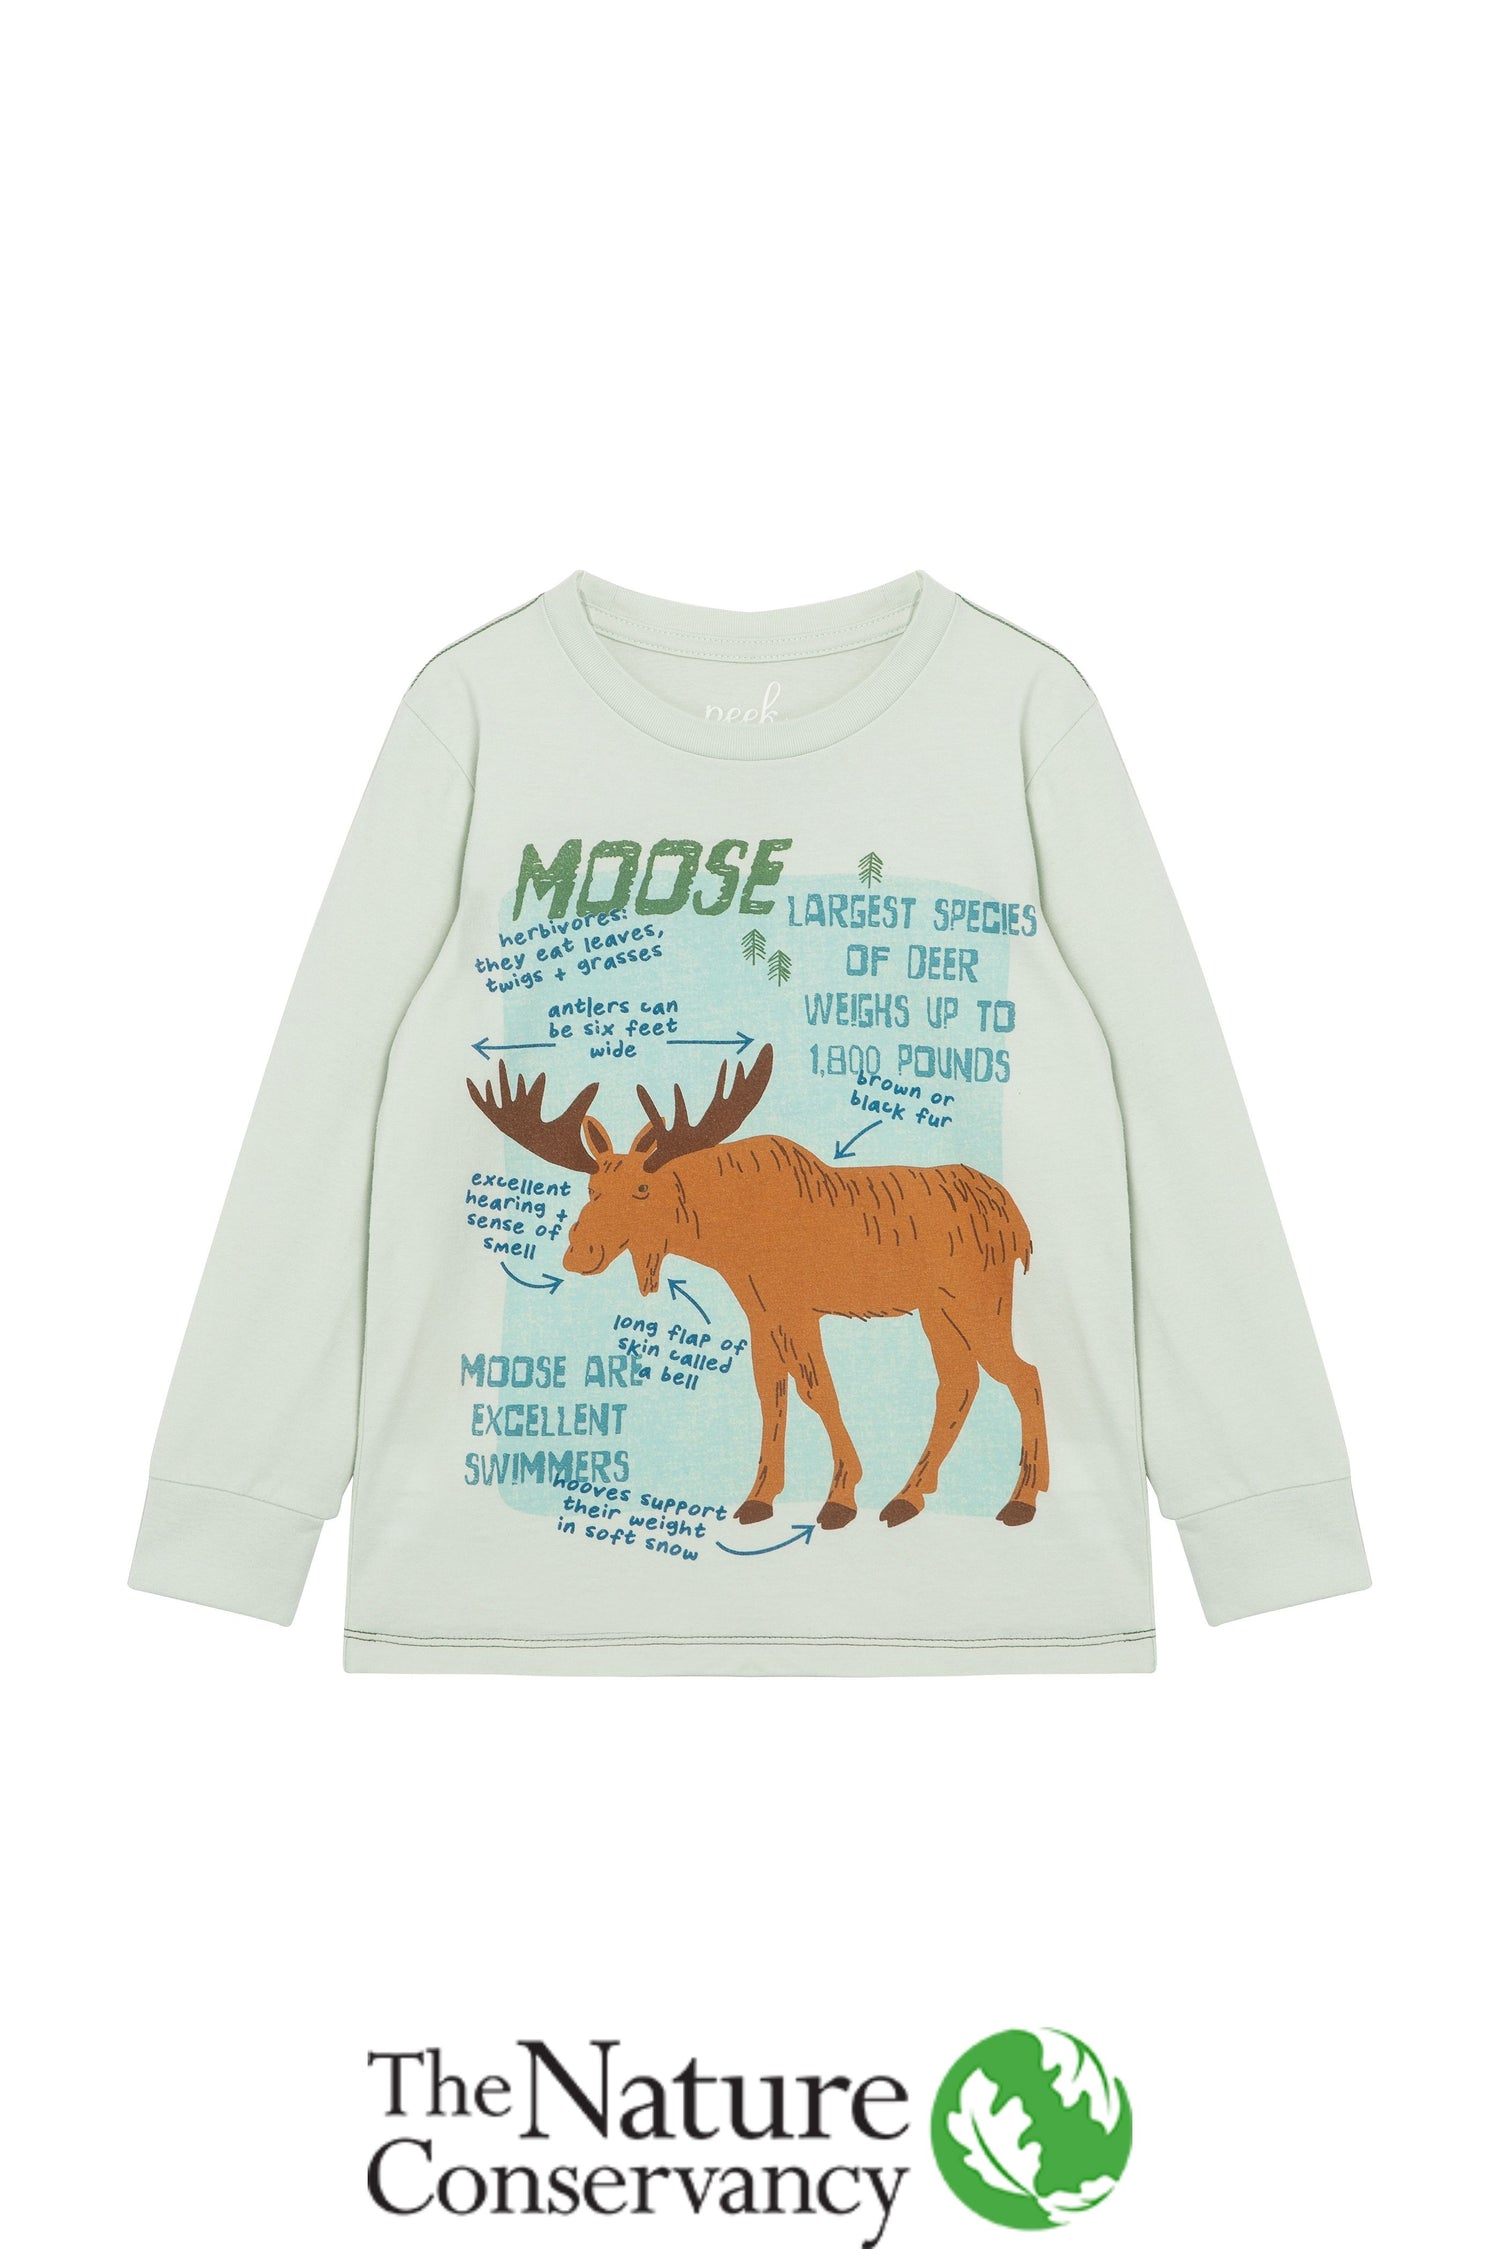 Light green sweatshirt with illustrated moose and various moose-related facts & text